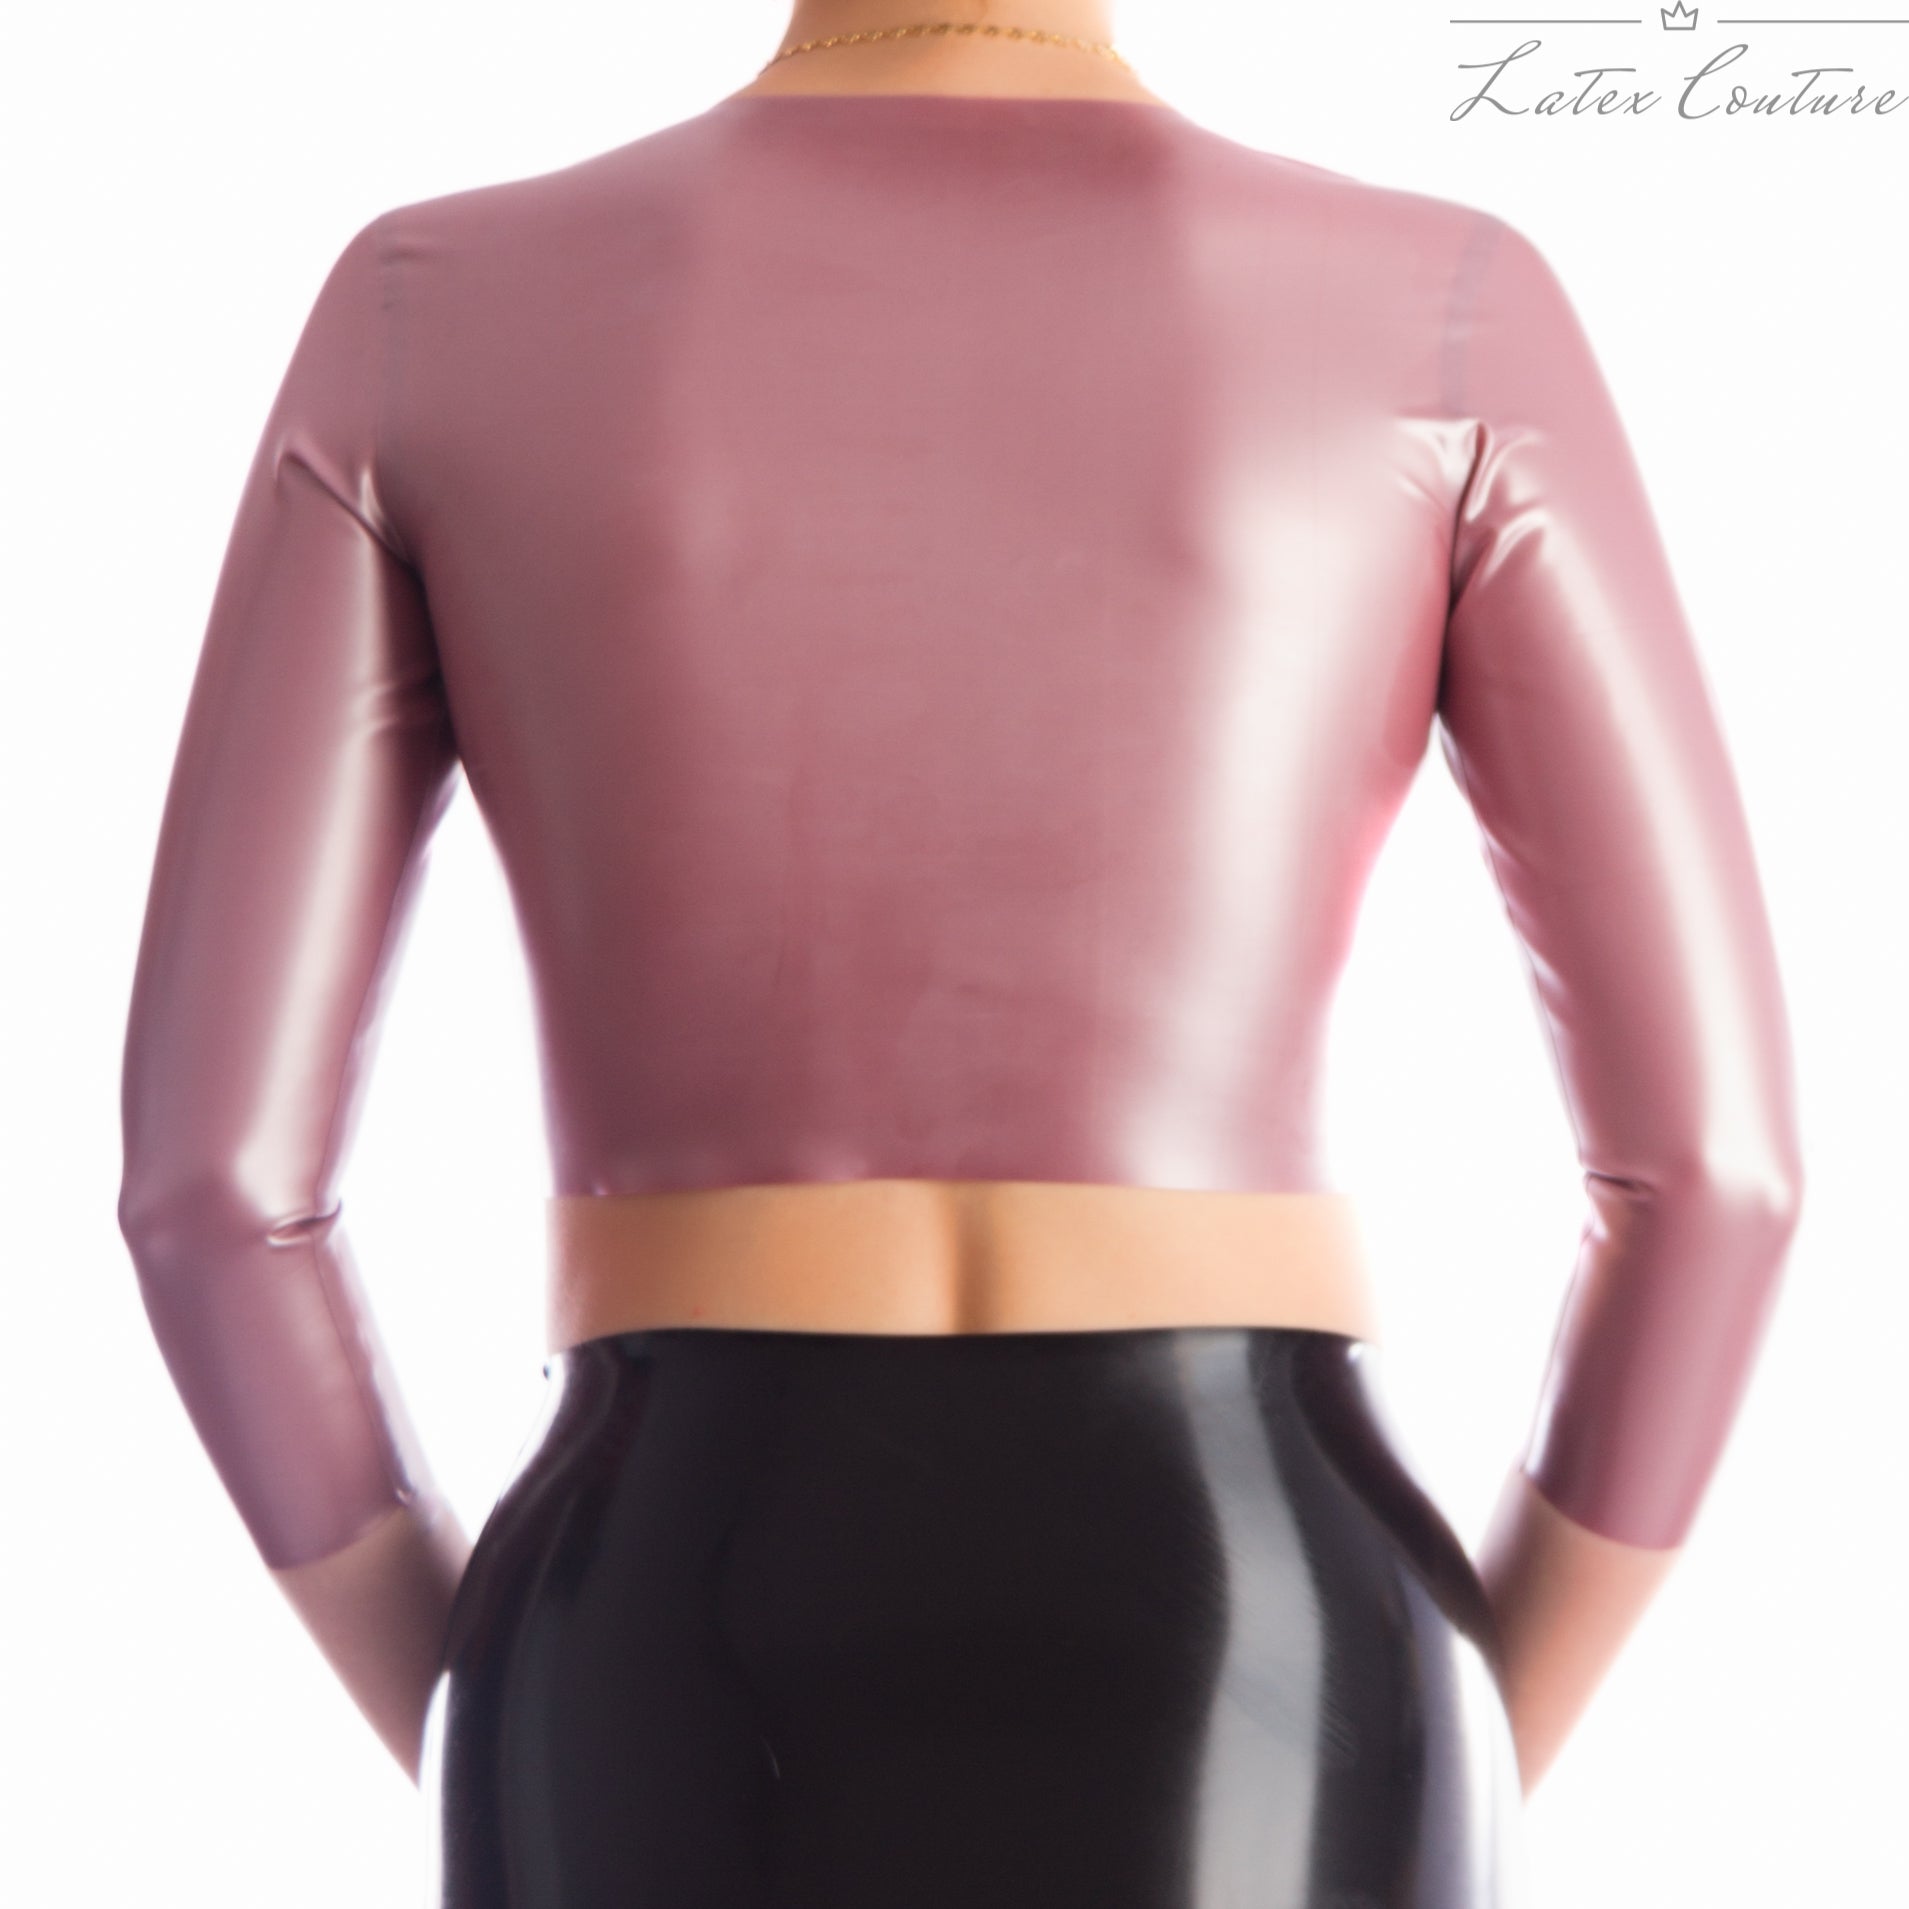 Latex Crop Top - Latex High Necked 3/4 Sleeved Crop Top - Latex Couture